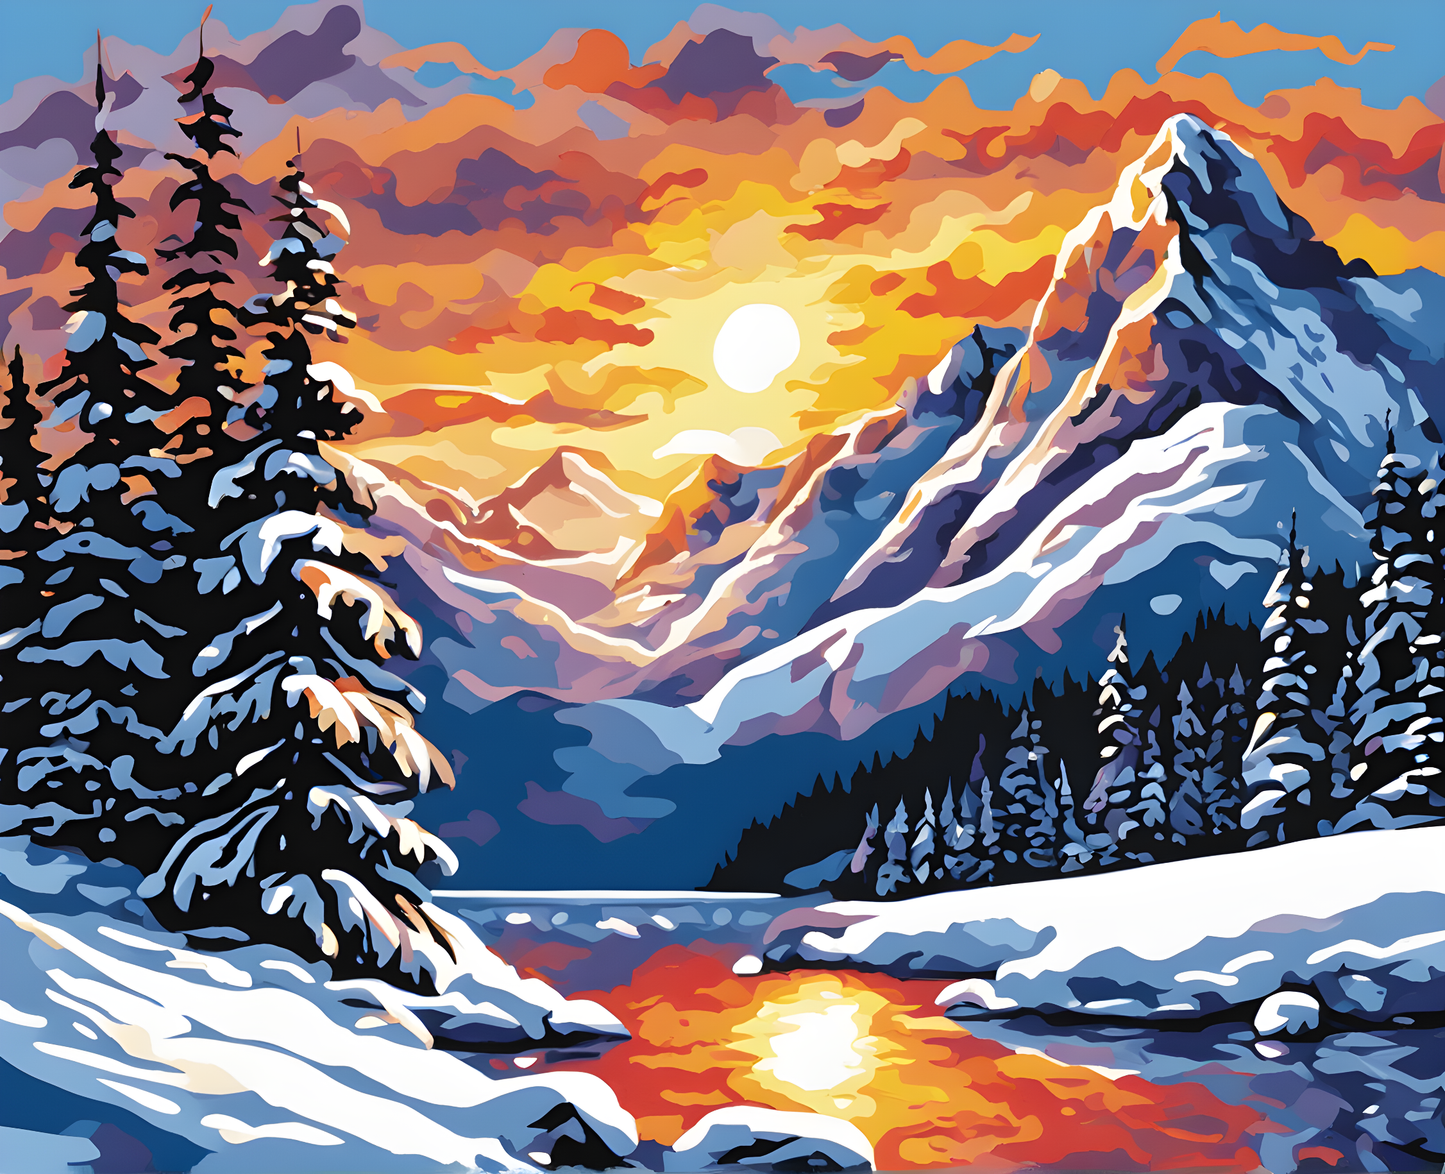 Sunrise on a Snowy Mountain - Van-Go Paint-By-Number Kit